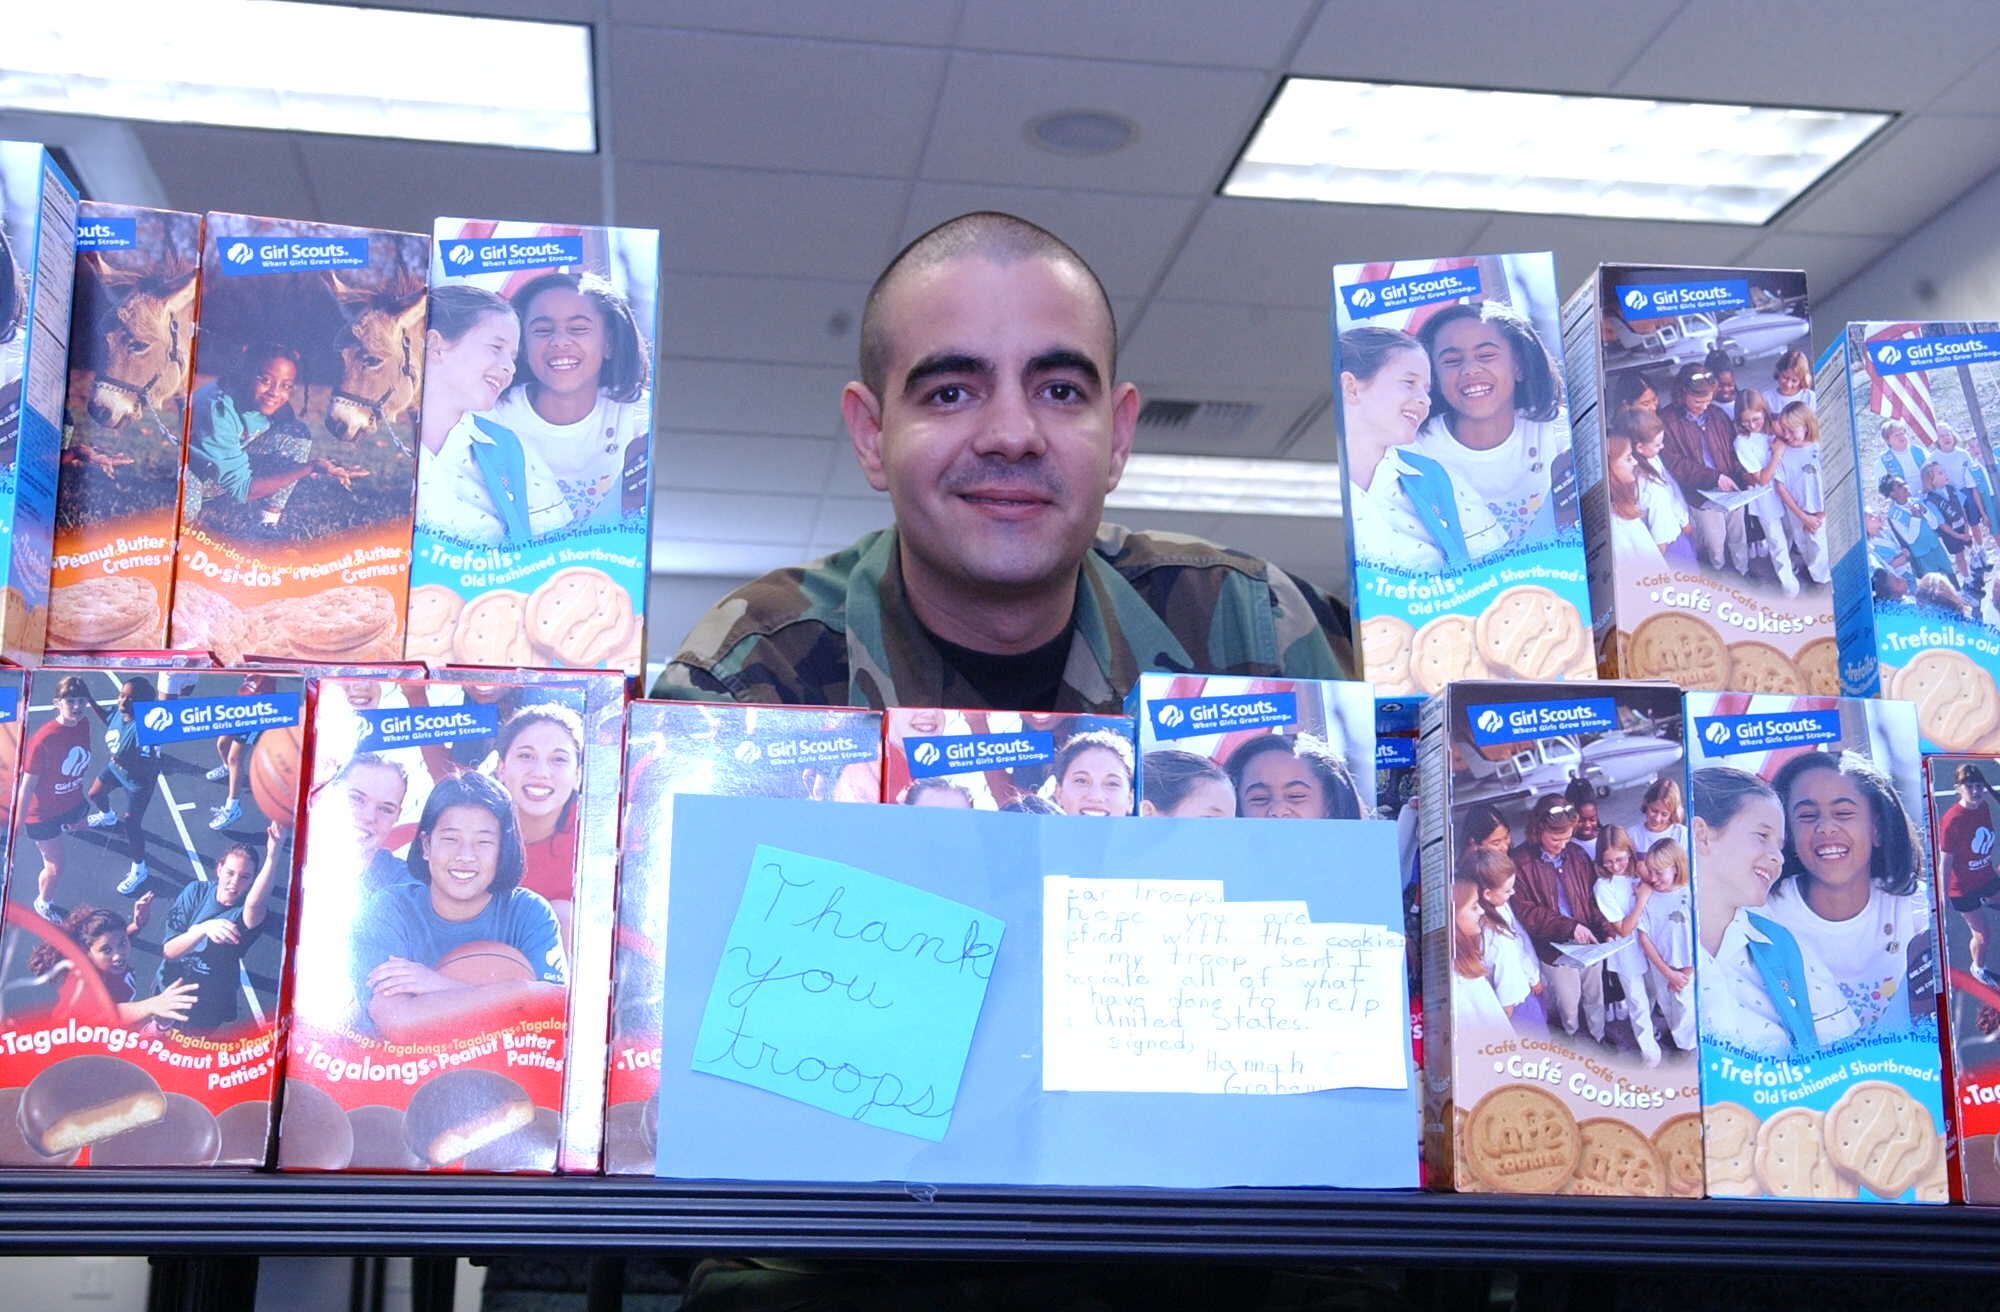 Technical Sgt. Carlos Ramossanchez, surrounded by some of the more than 250 cases of Girl Scout cookies he hands out to Team Fairchild deployers. Sergeant Ramossanchez is the Family Readiness Coordinator at the Airman and Family Readiness Center. (U.S. Air Force photo/Joe B. Wiles)